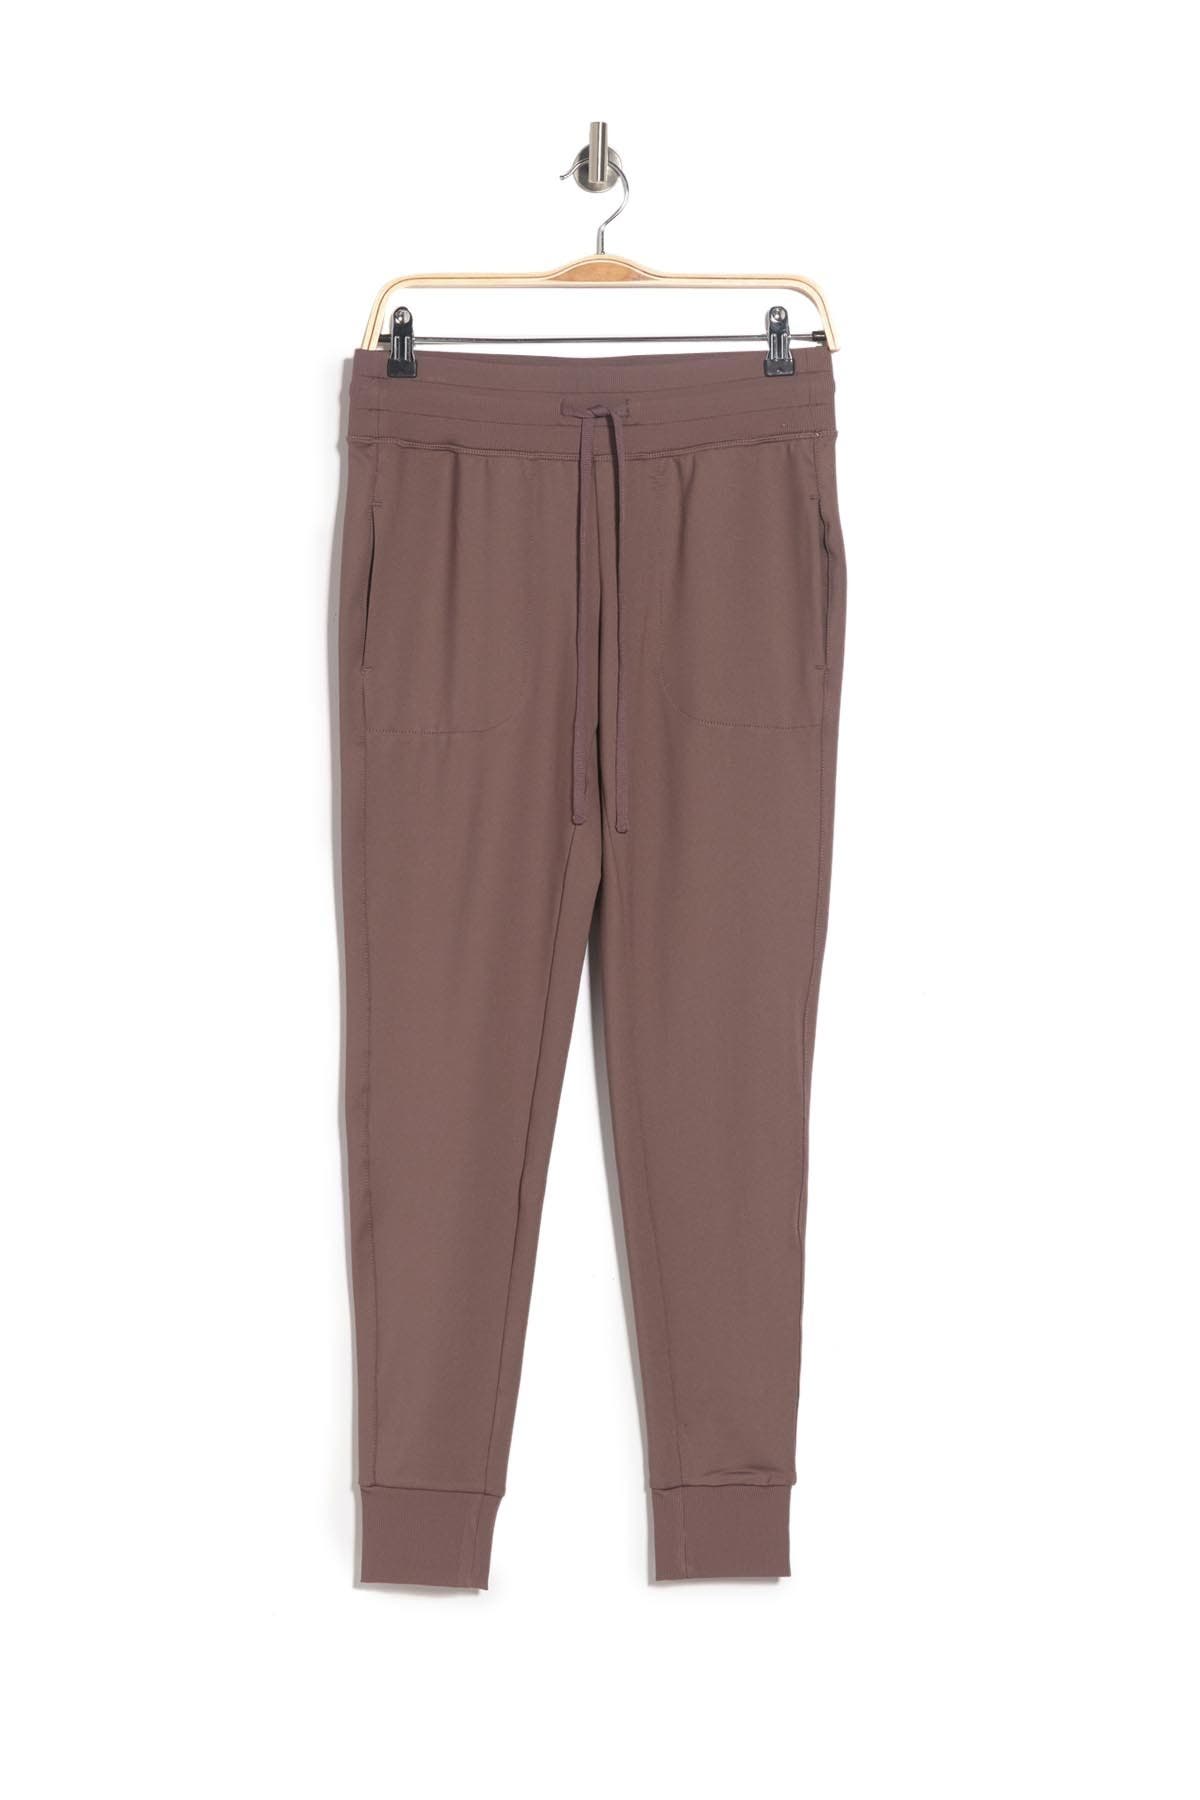 Z By Zella | From The Top Daily Joggers | Nordstrom Rack